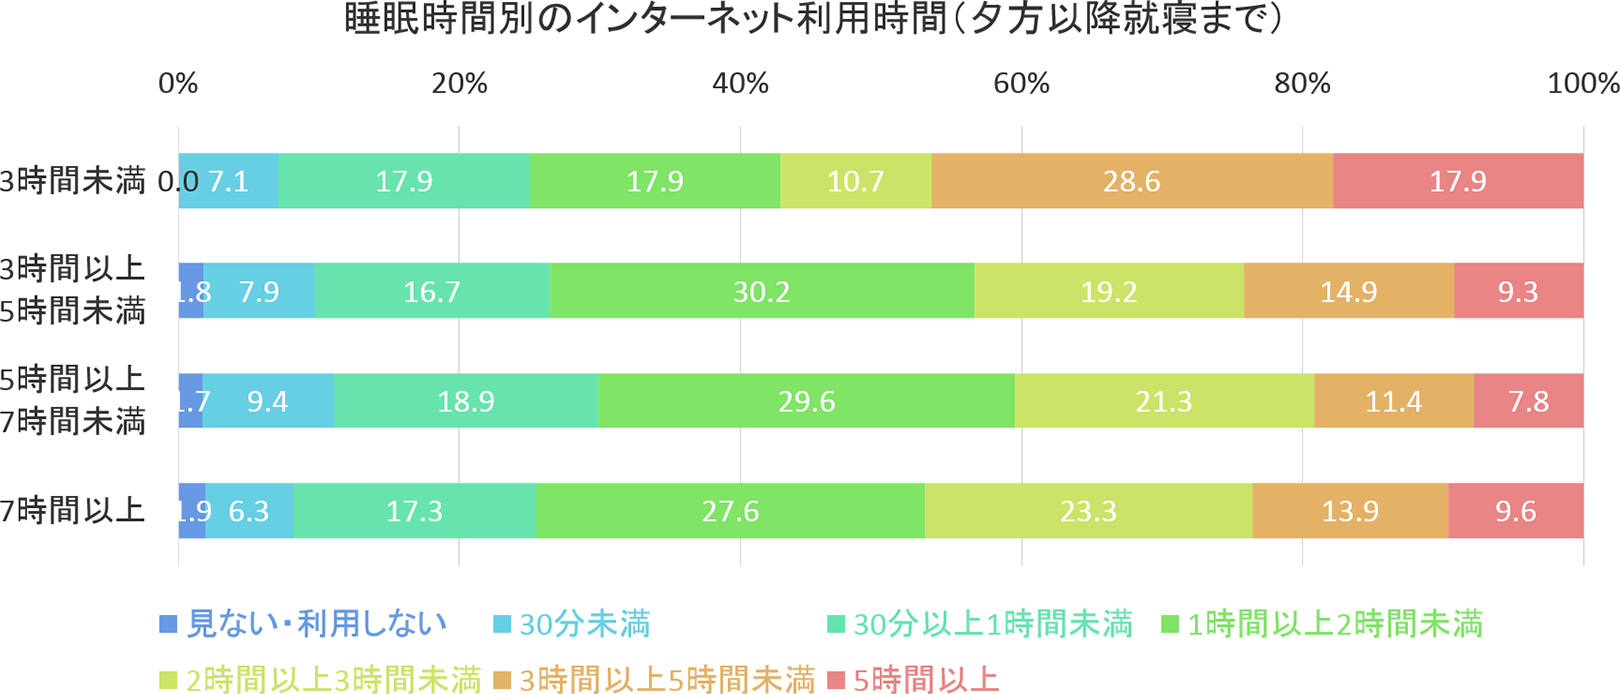 201604-01-fig-02.png